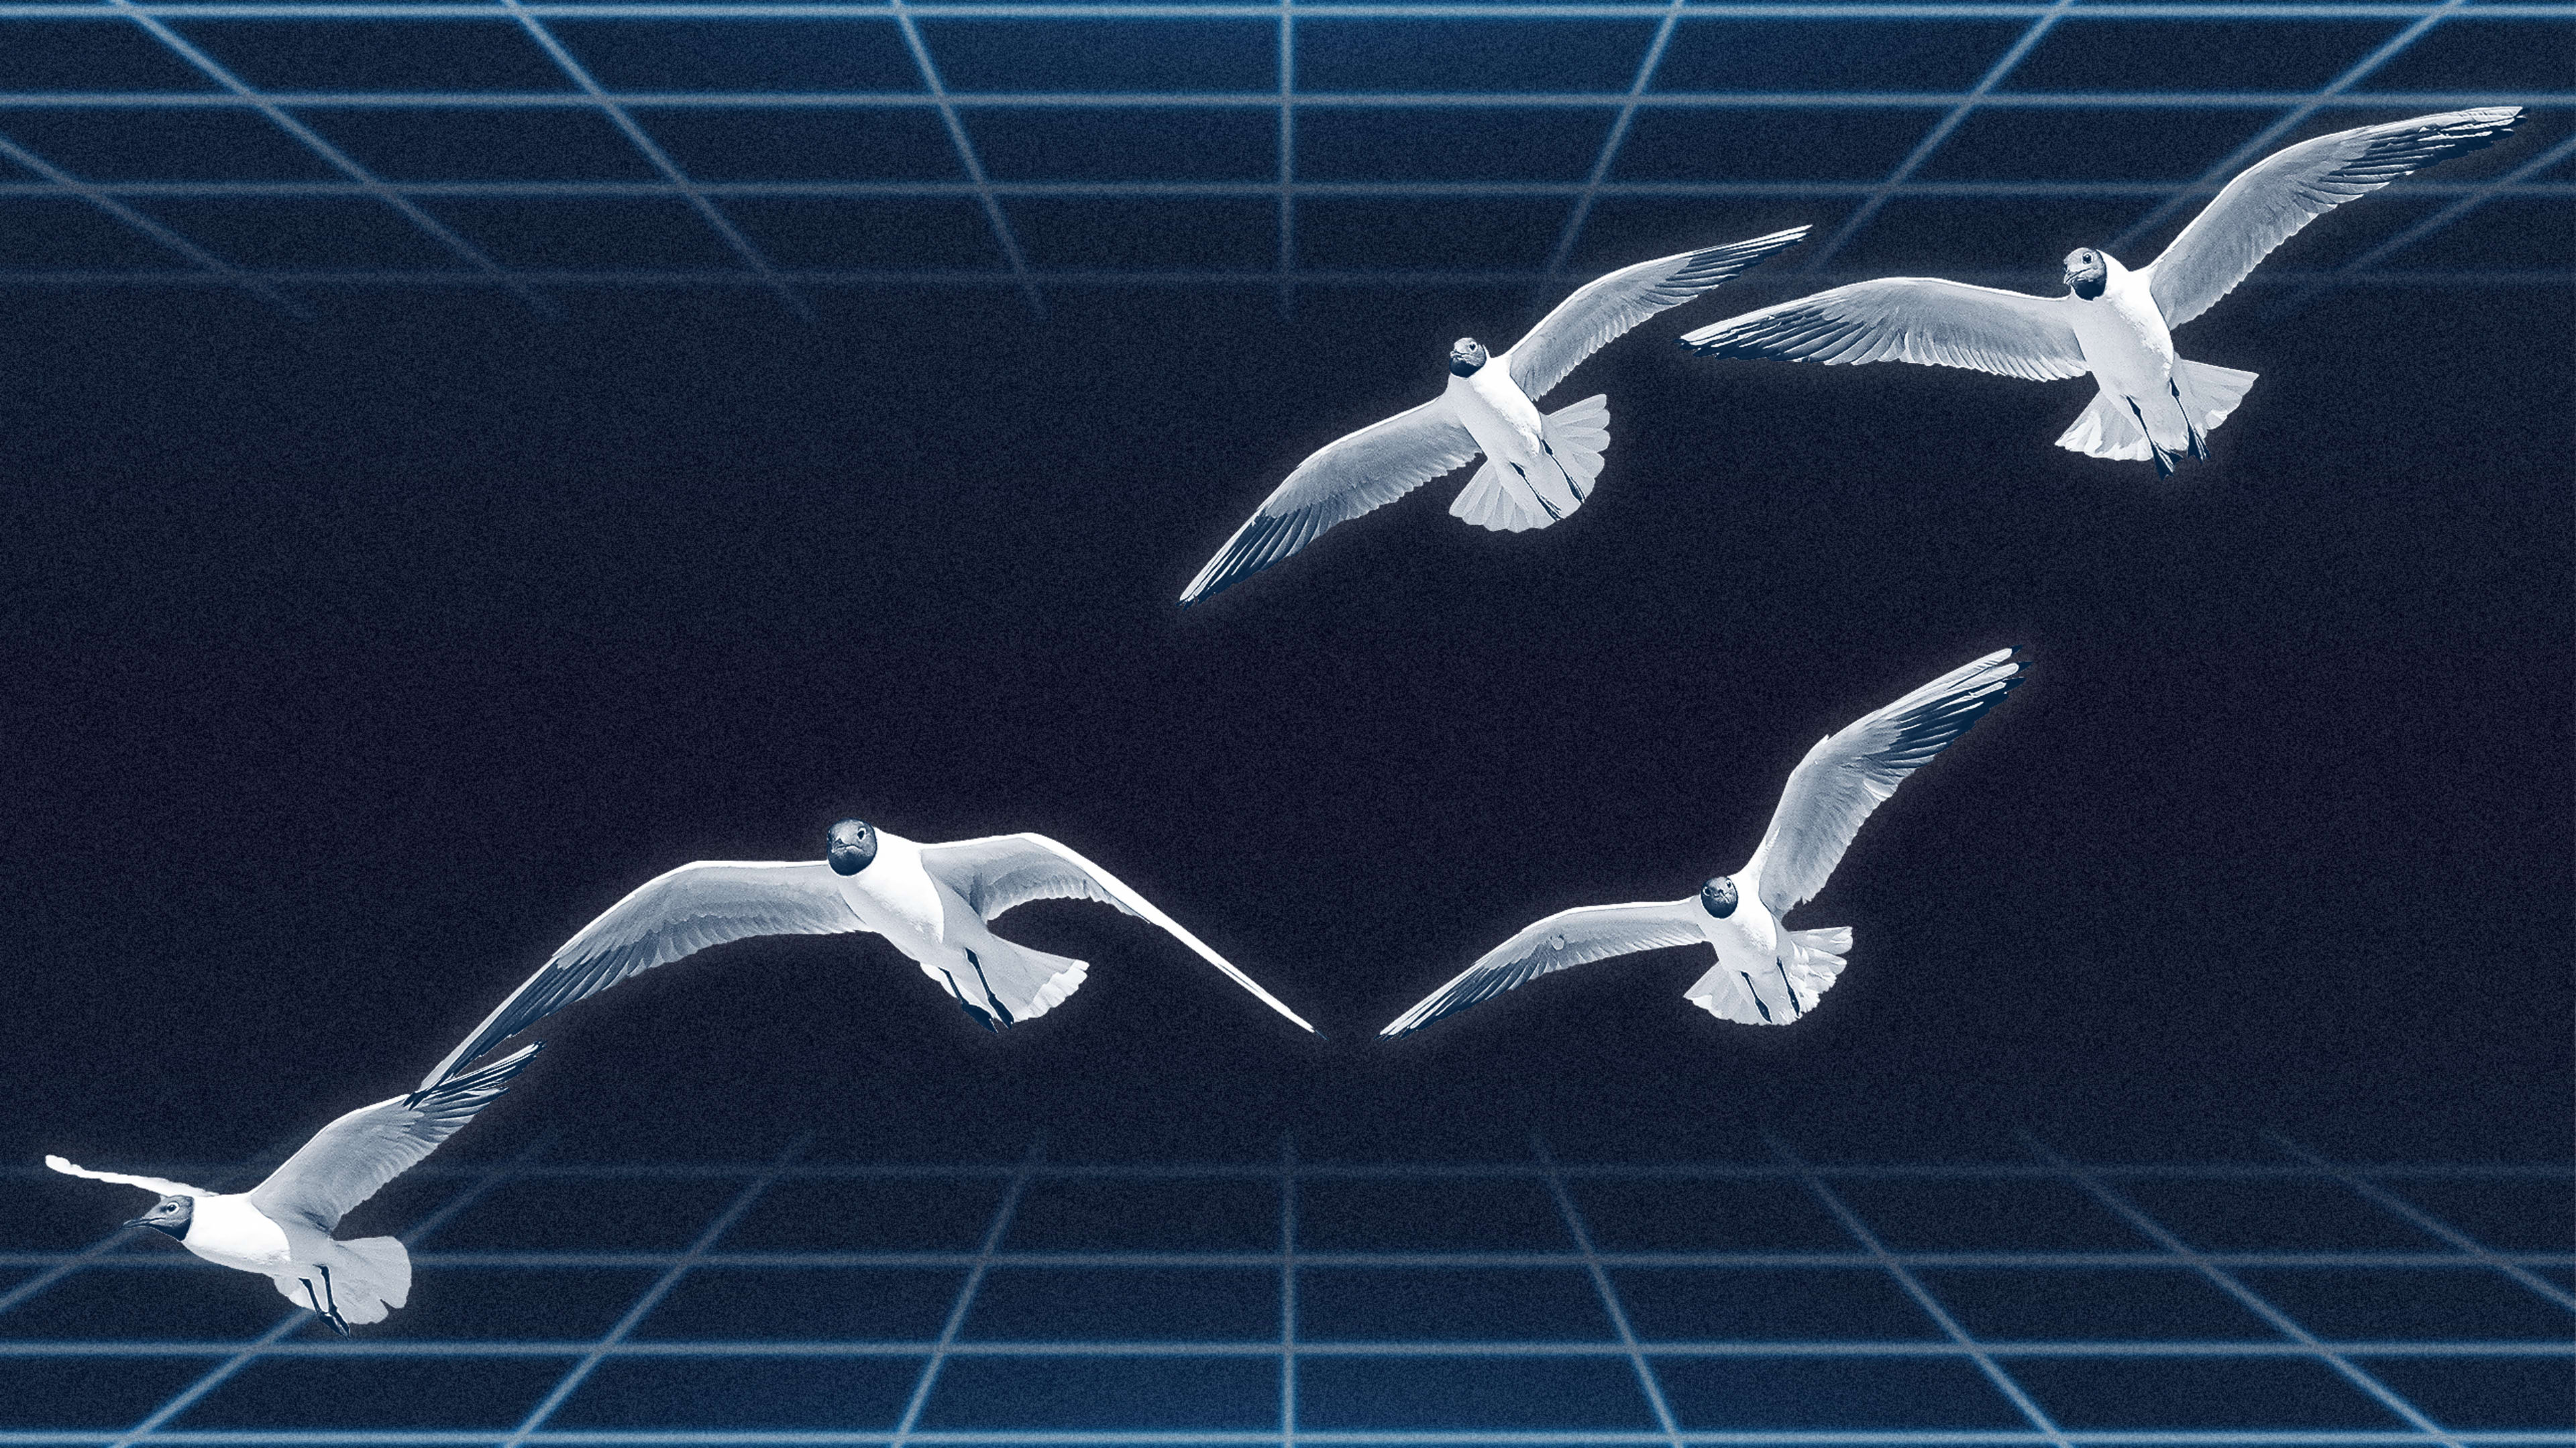 Computer scientists say seagull algorithms could hide the secret to greener cloud computing